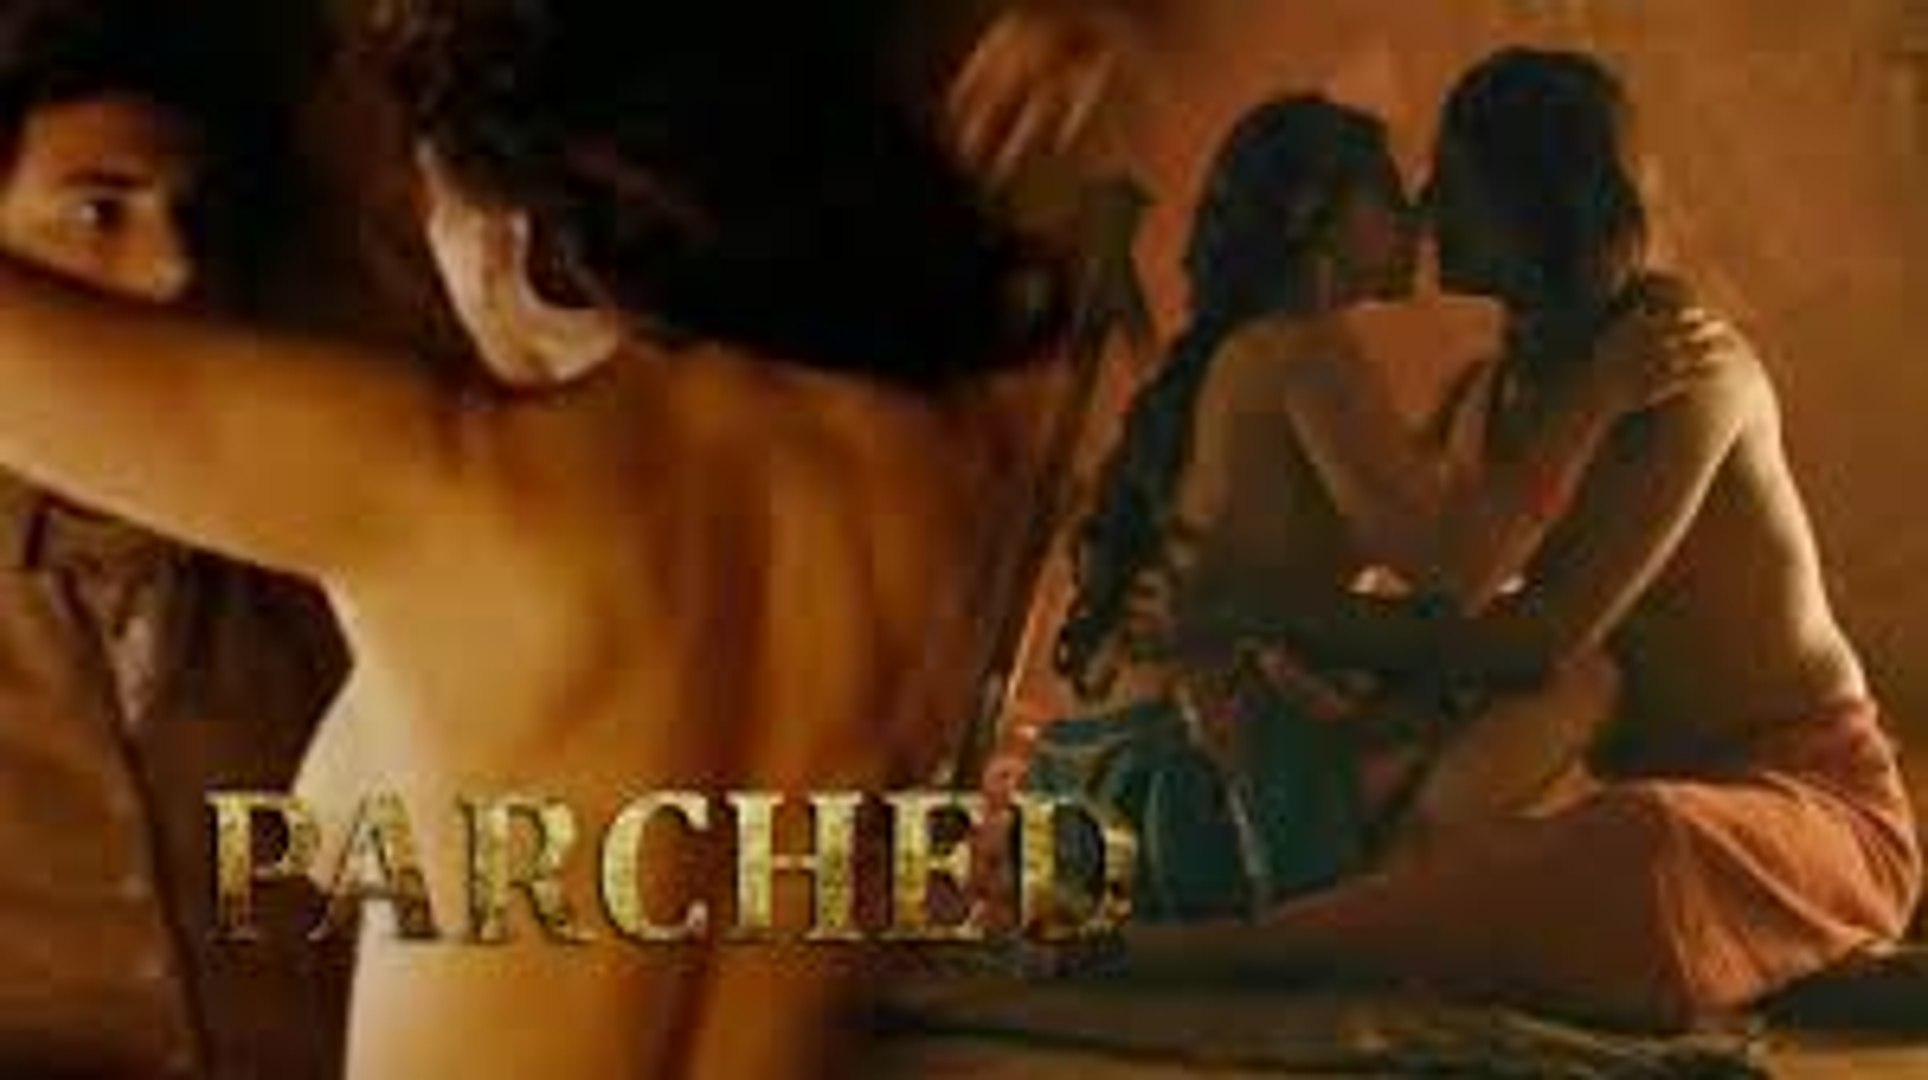 Hollywood B Garet Sex Movie In Hindi Dubbed - Parched - UNRATED - Dvd Part-1 - video dailymotion